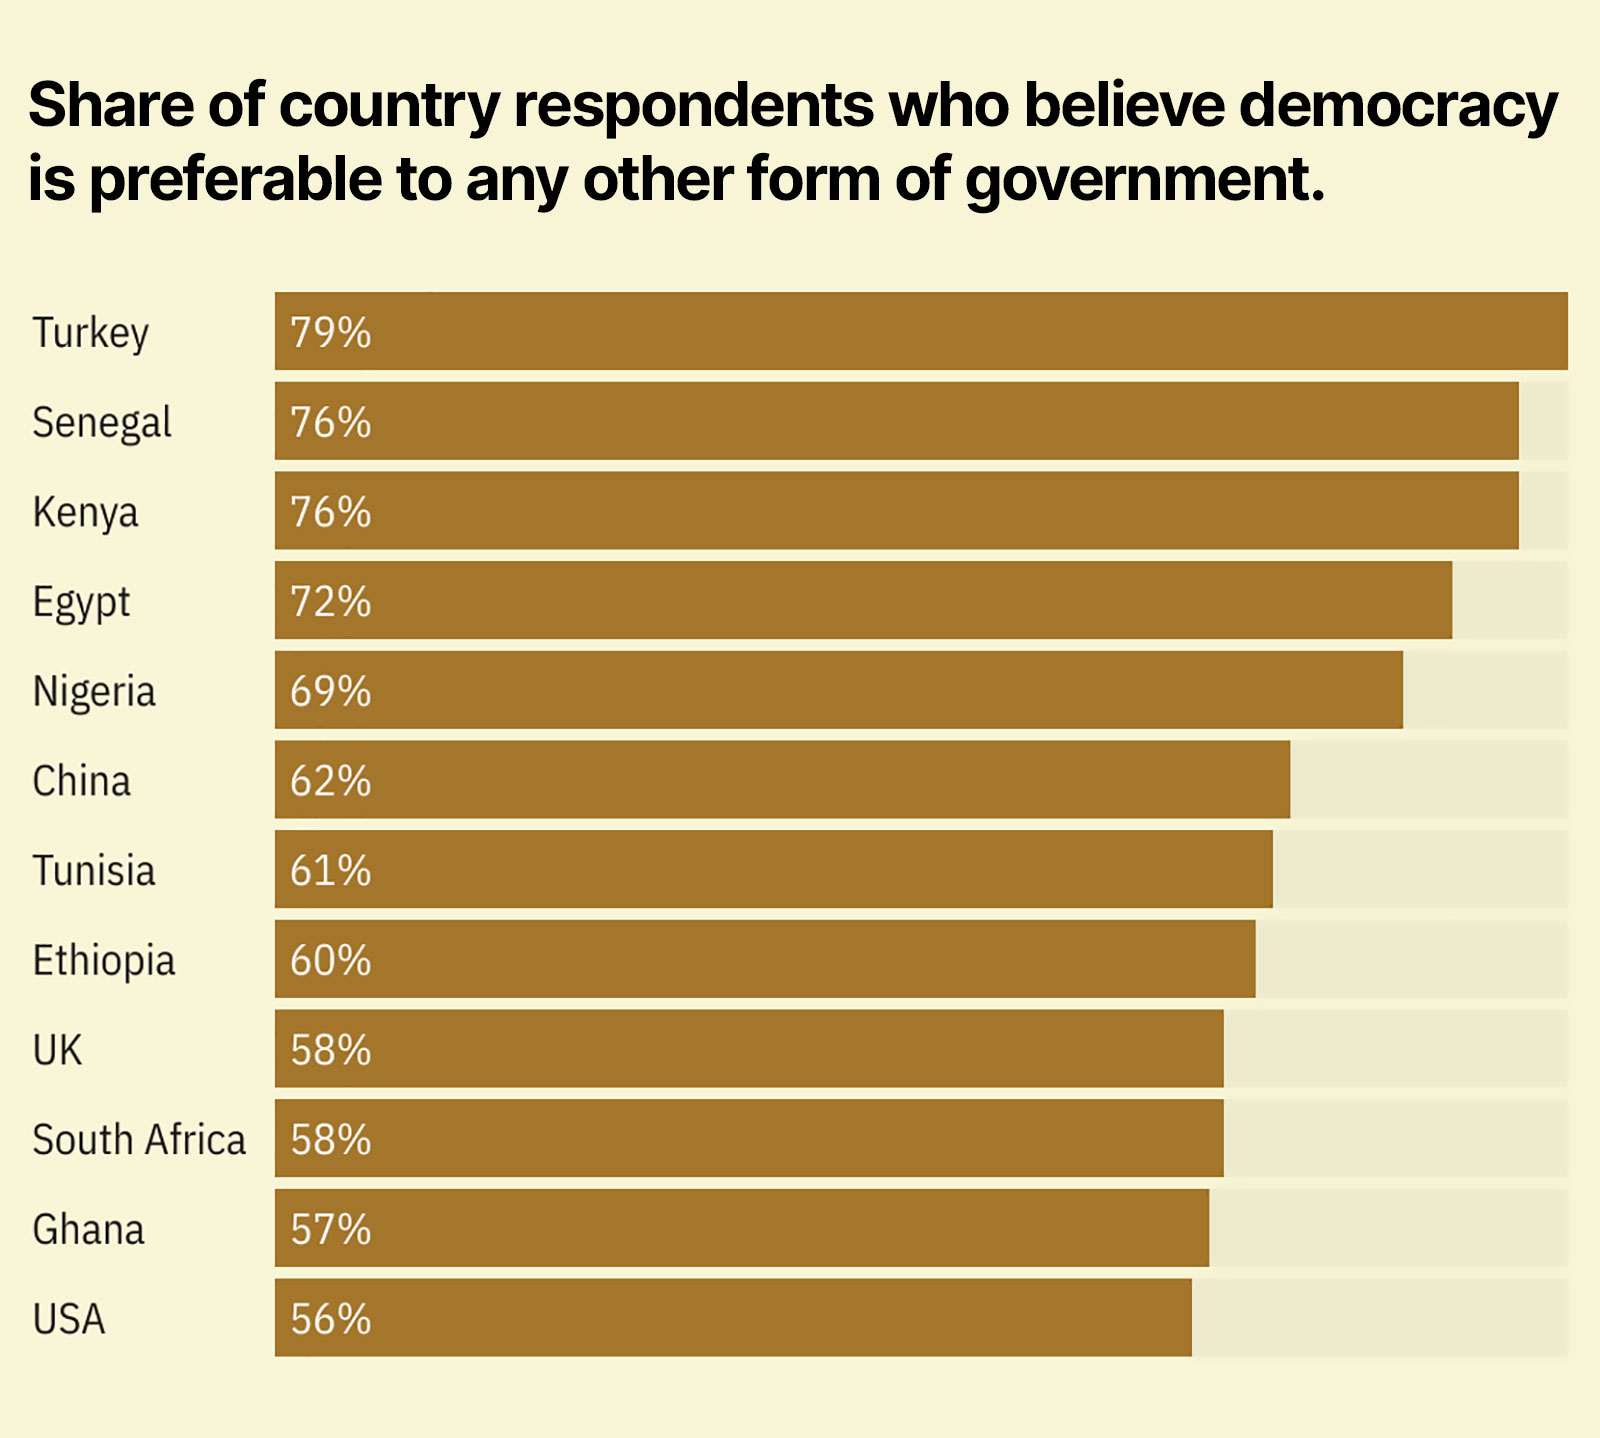 The survey covered 30 countries with statistically representative sample of 1,000 people aged 18 and older in each country. 2,000 people each were surveyed in South Africa and USA. Source: Open Society Foundations (OSF), Chart: Yinka Adegoke/Semafor.